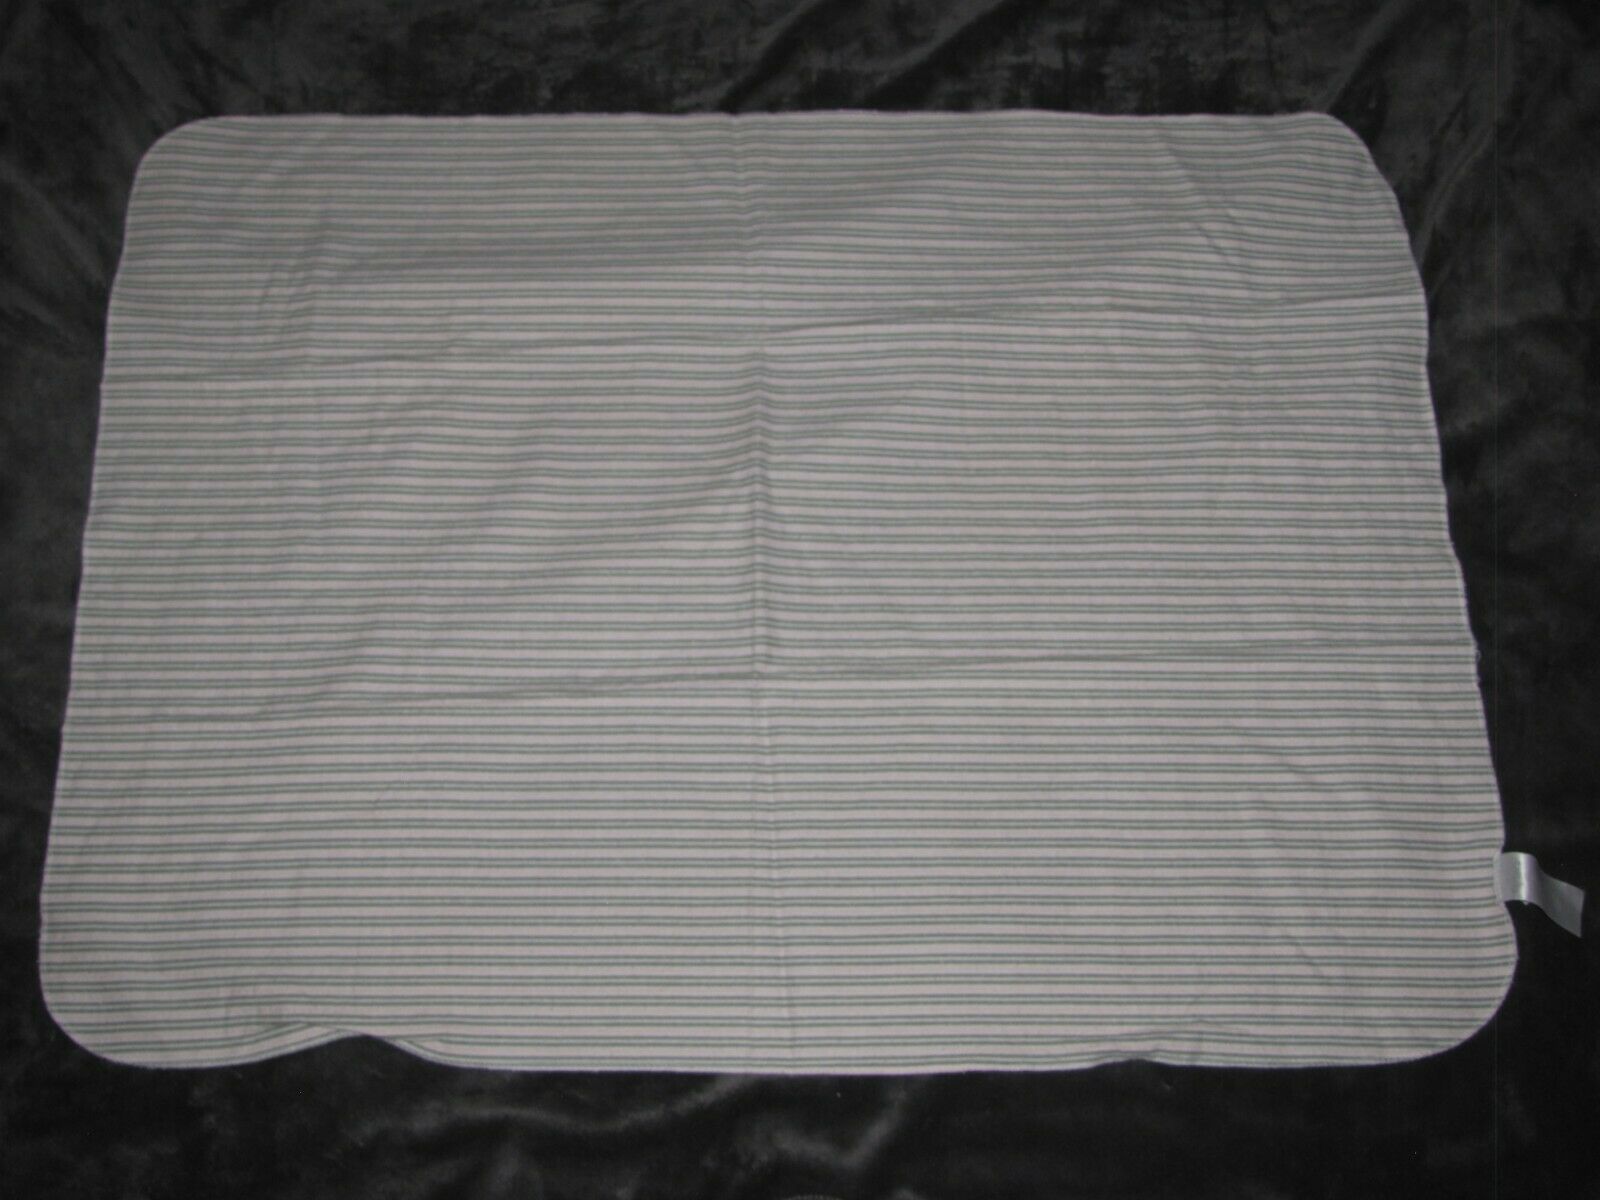 Primary image for Baby Girl Cotton Flannel Receiving Blanket Carters Pink Gray White Stripe